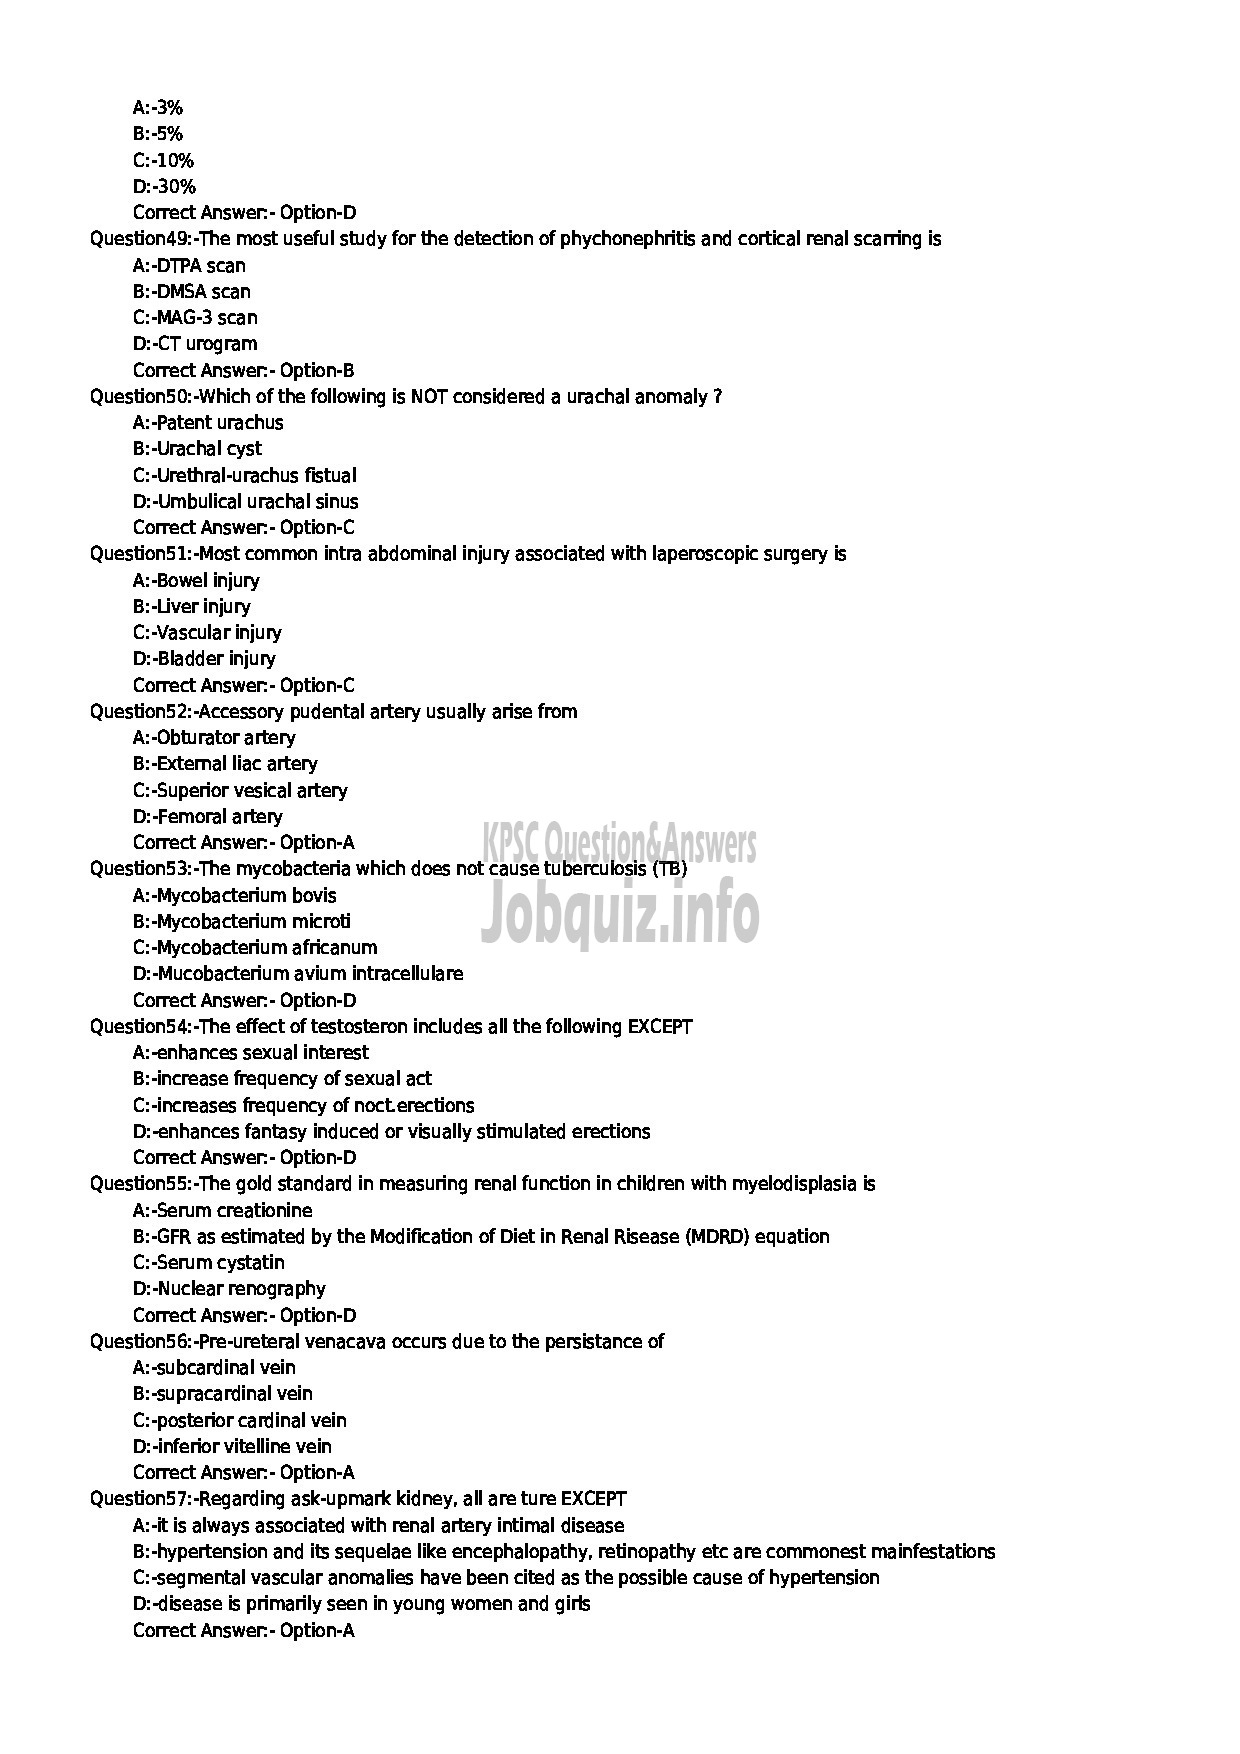 Kerala PSC Question Paper - SENIOR LECTURER IN GENITO URINARY SURGERY MEDICAL EDUCATION-6